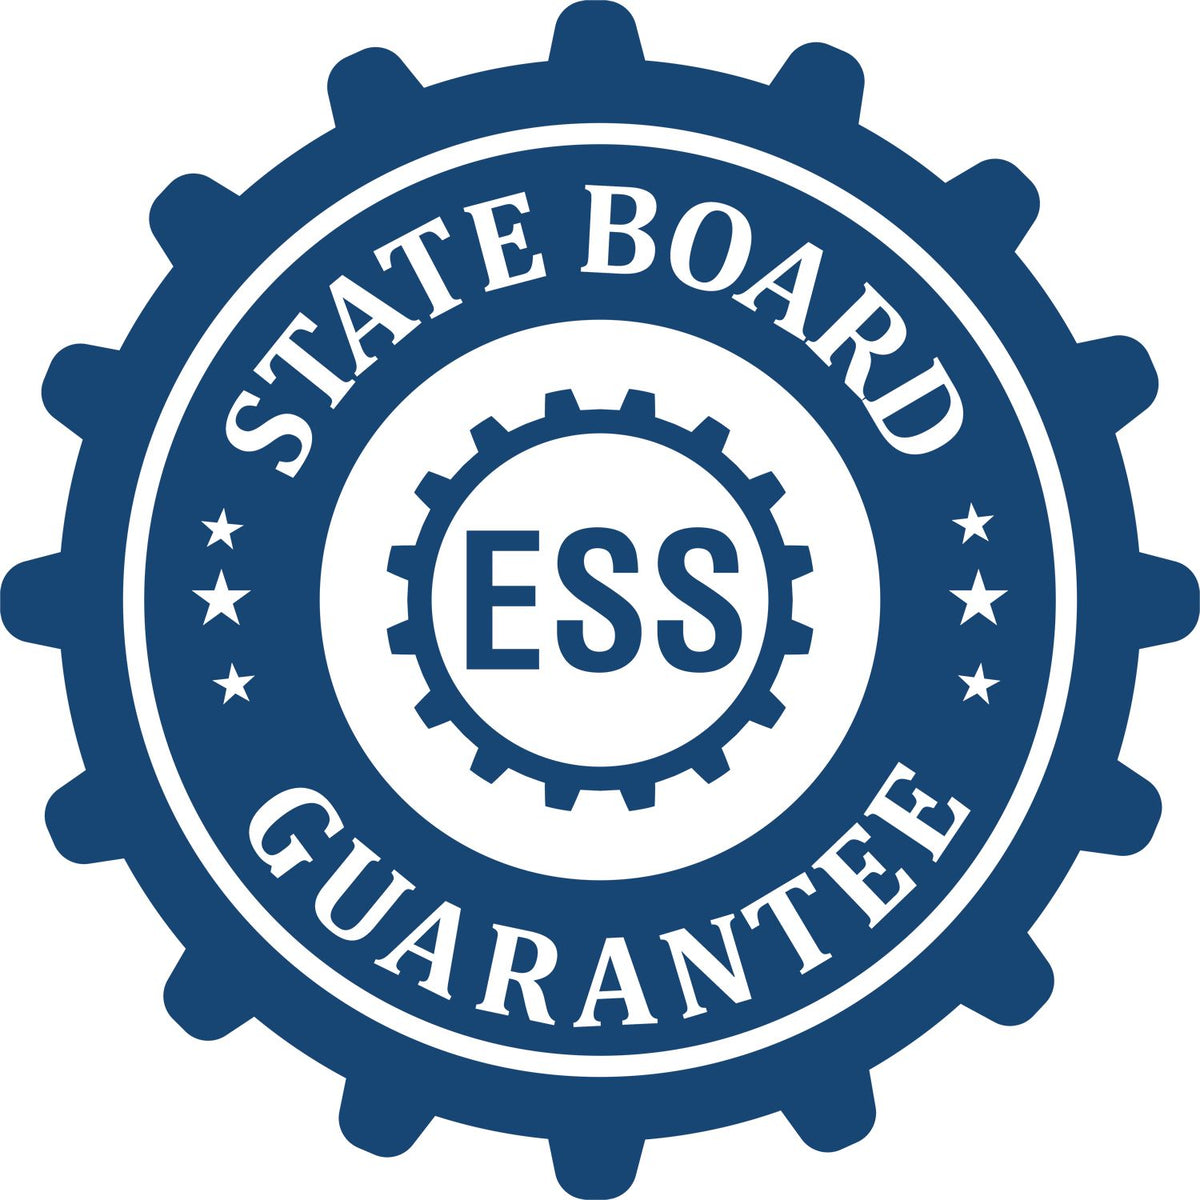 An emblem in a gear shape illustrating a state board guarantee for the Delaware Geologist Desk Seal